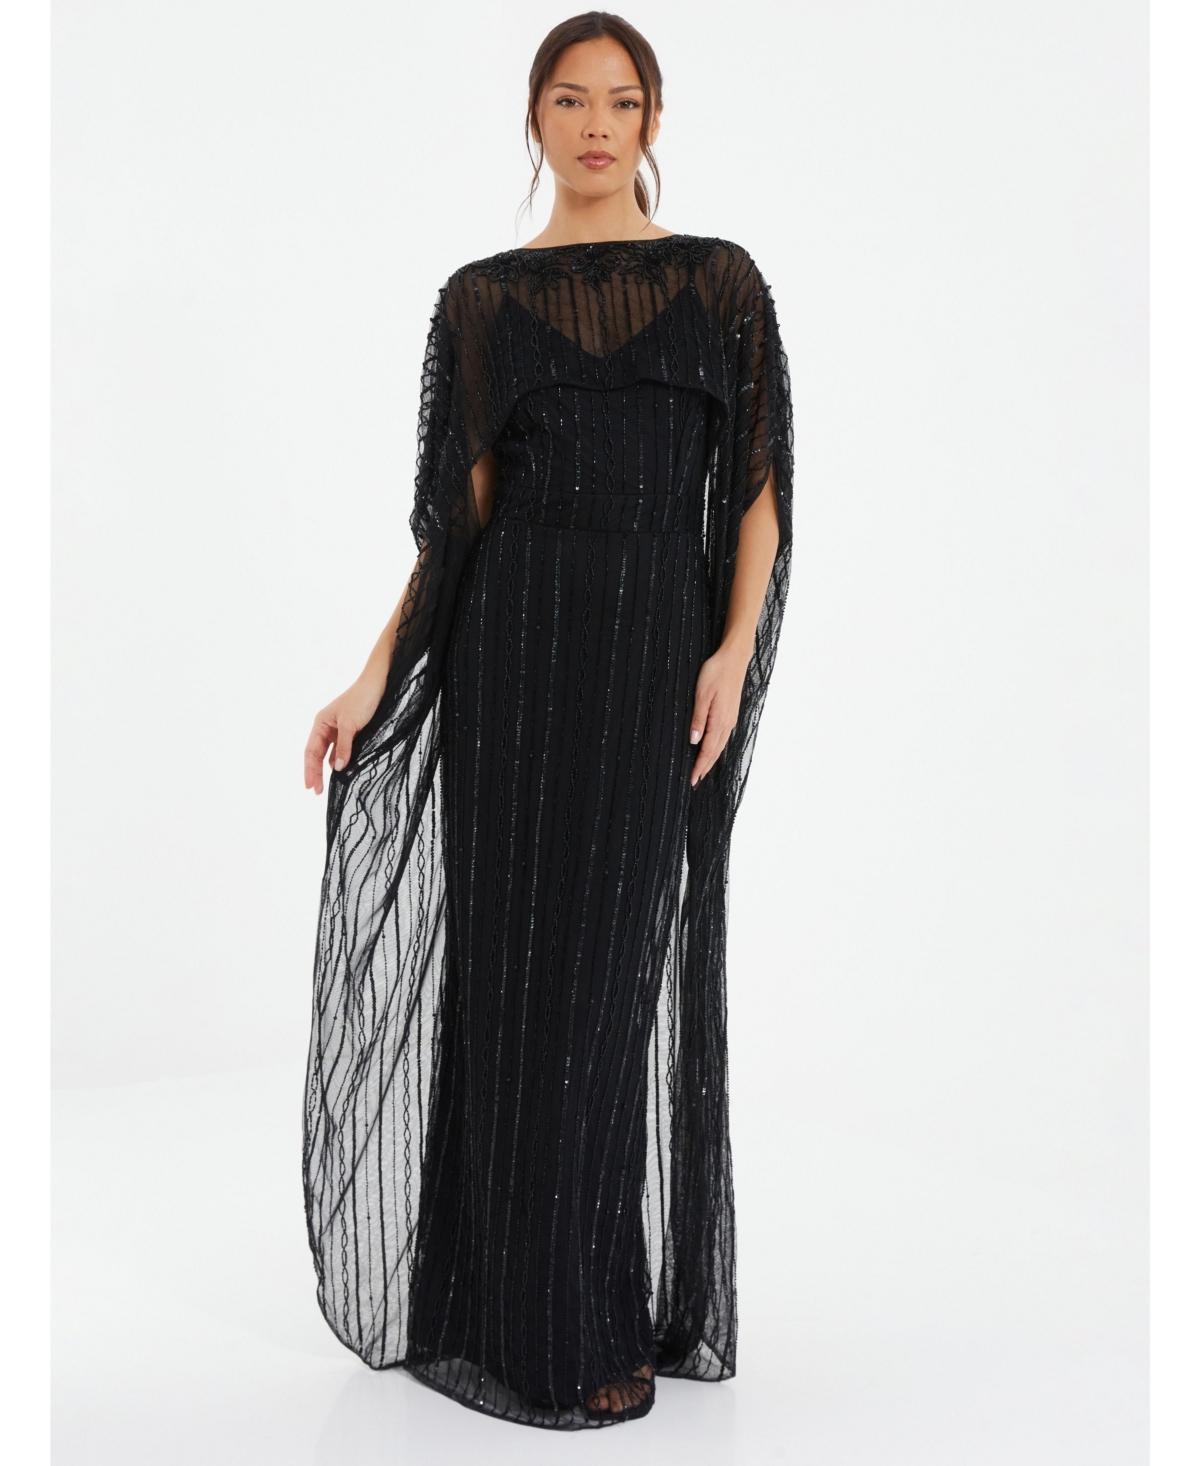 Women's Embelleshed Mesh Evening Dress With Detachable Cape - Black